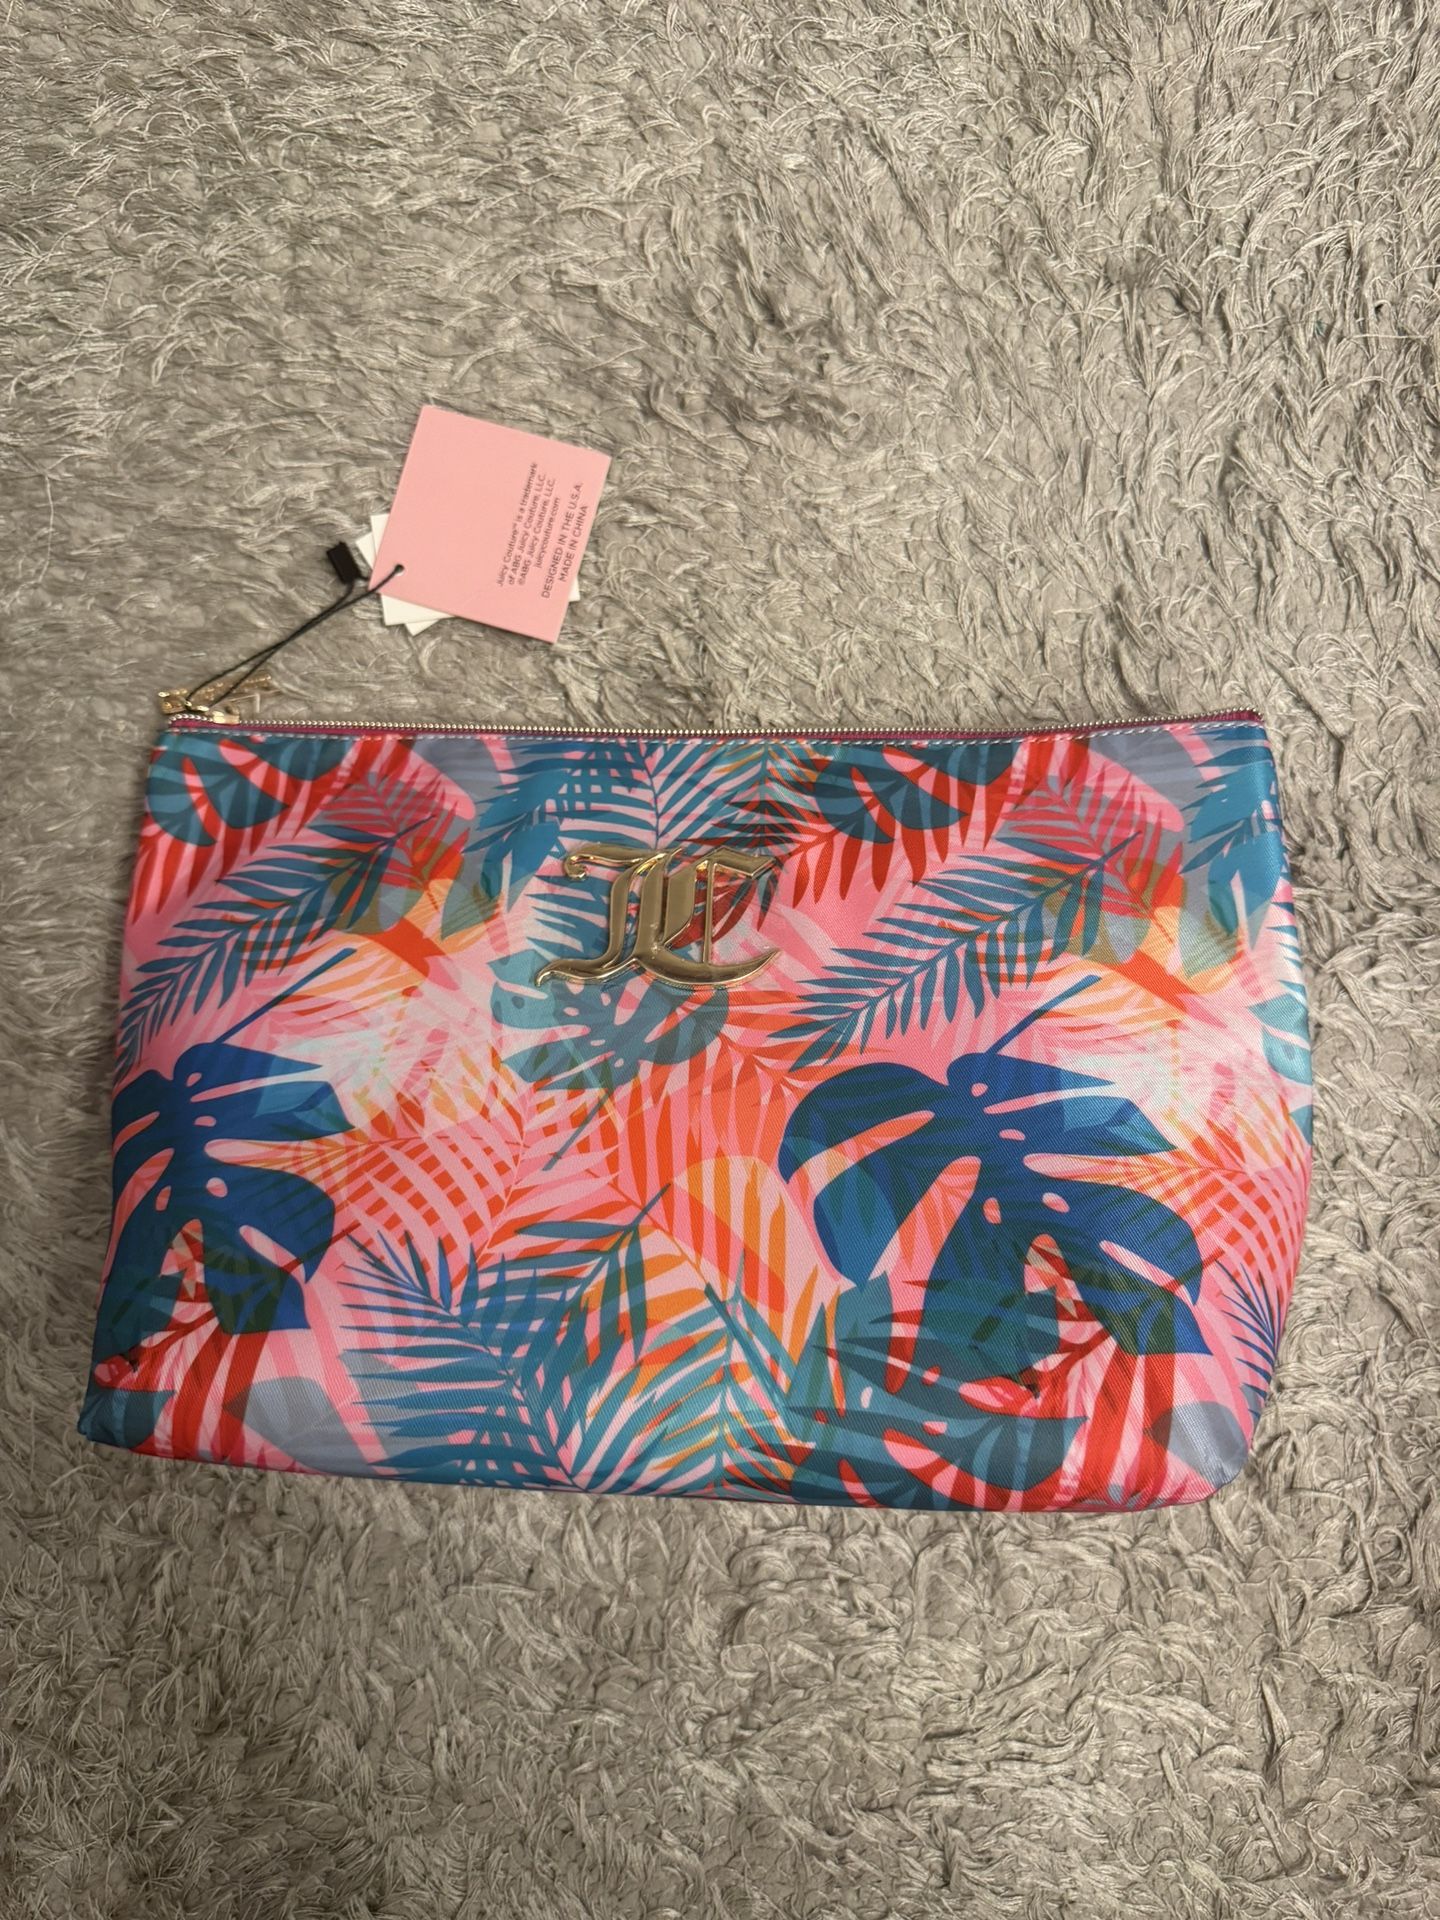 Colorful Juicy Couture Cosmetic Bag!